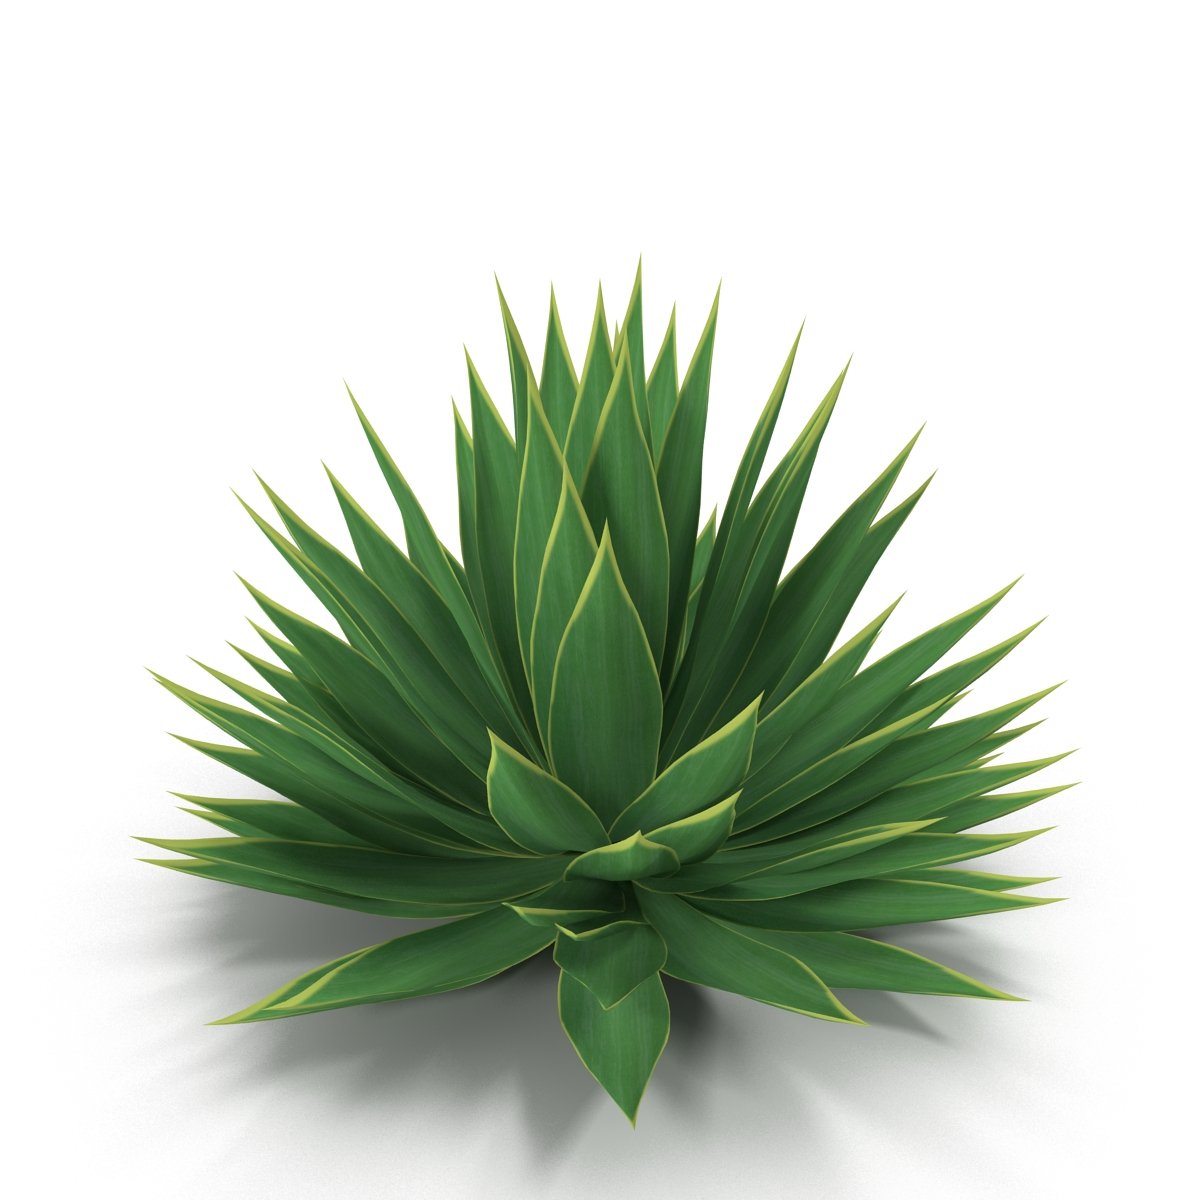 Agave preview image.